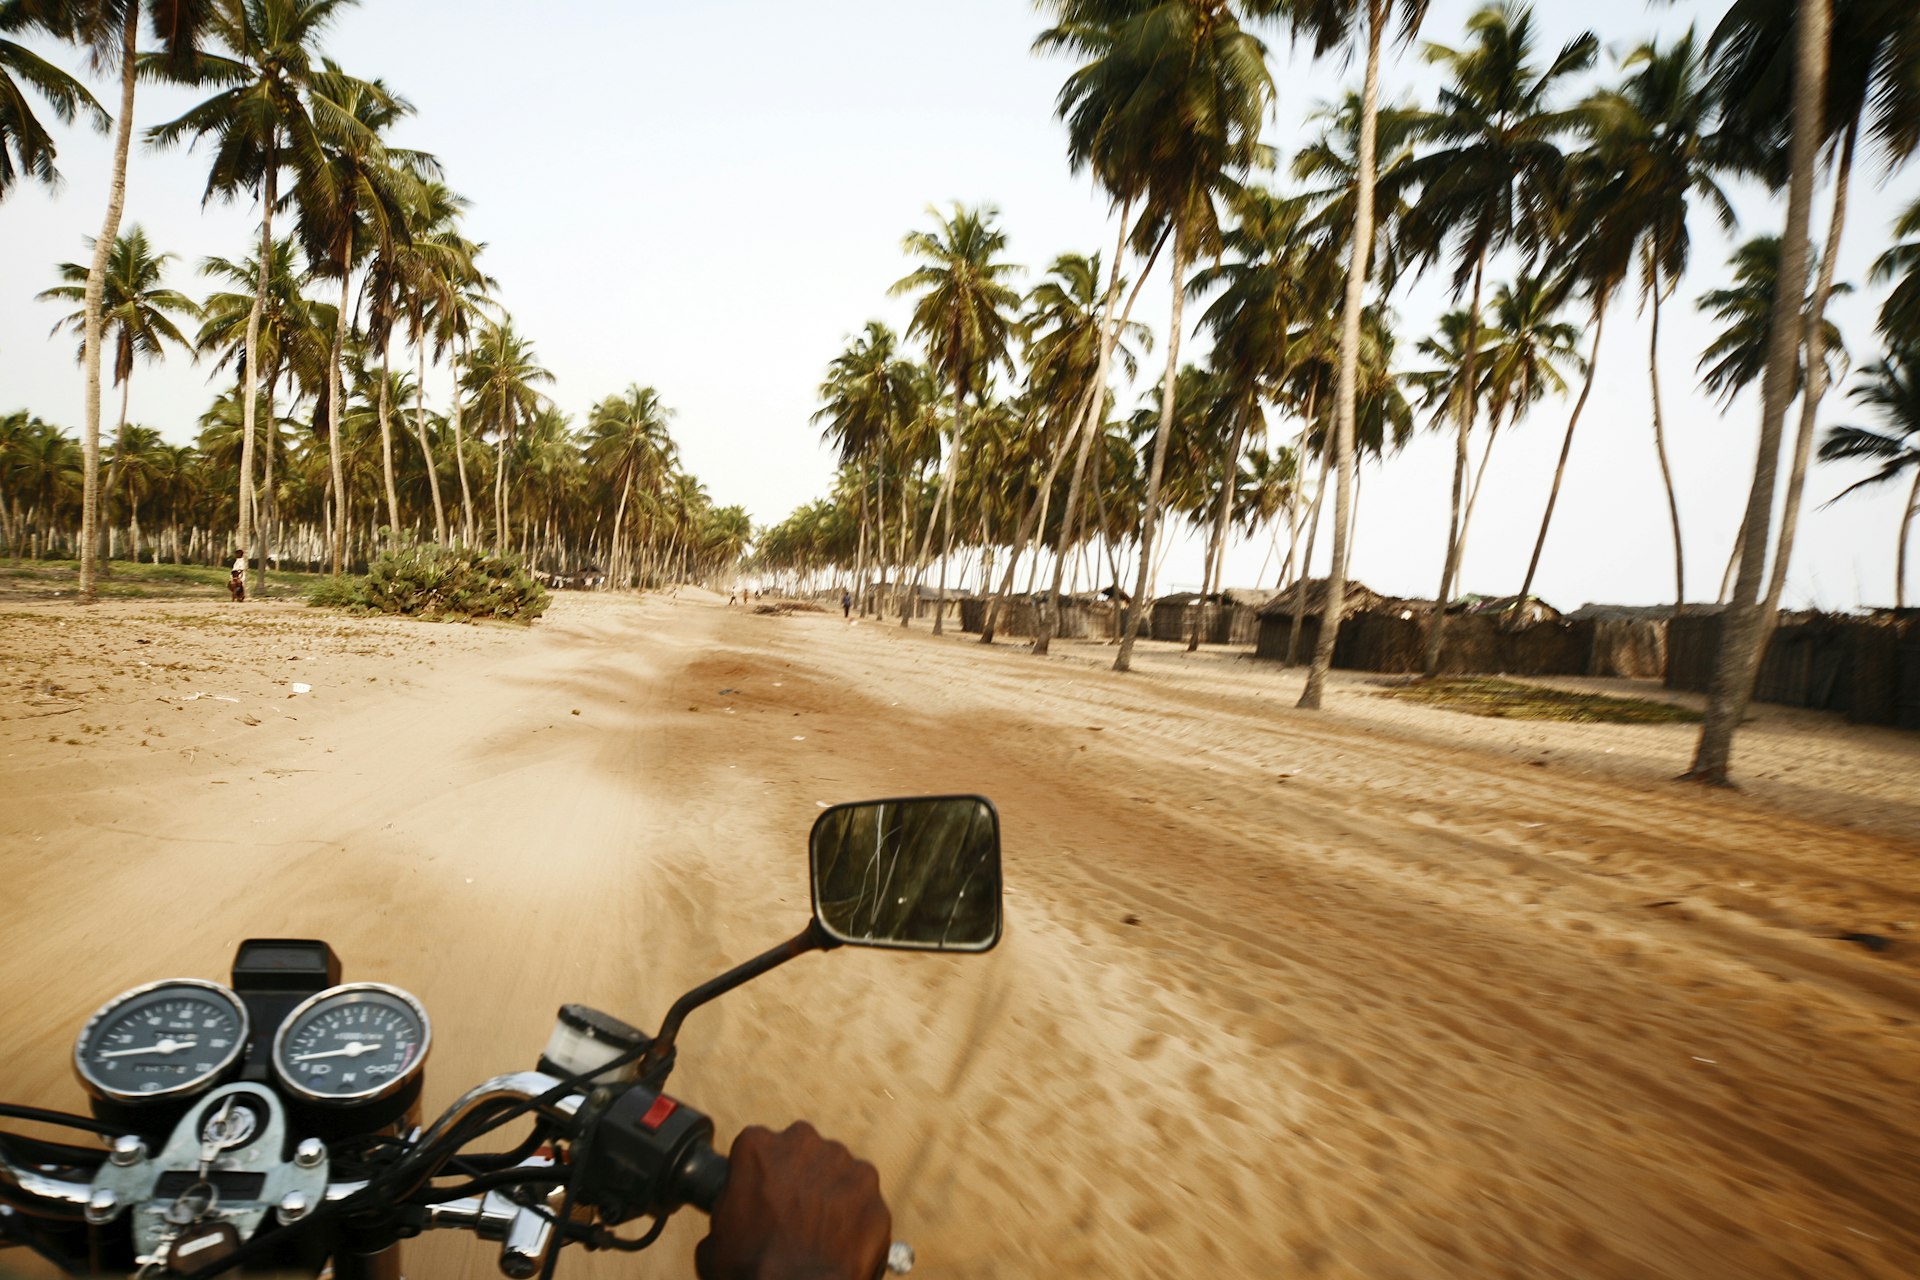 A man riding a motobike in a beach road lined with palm trees in Benin